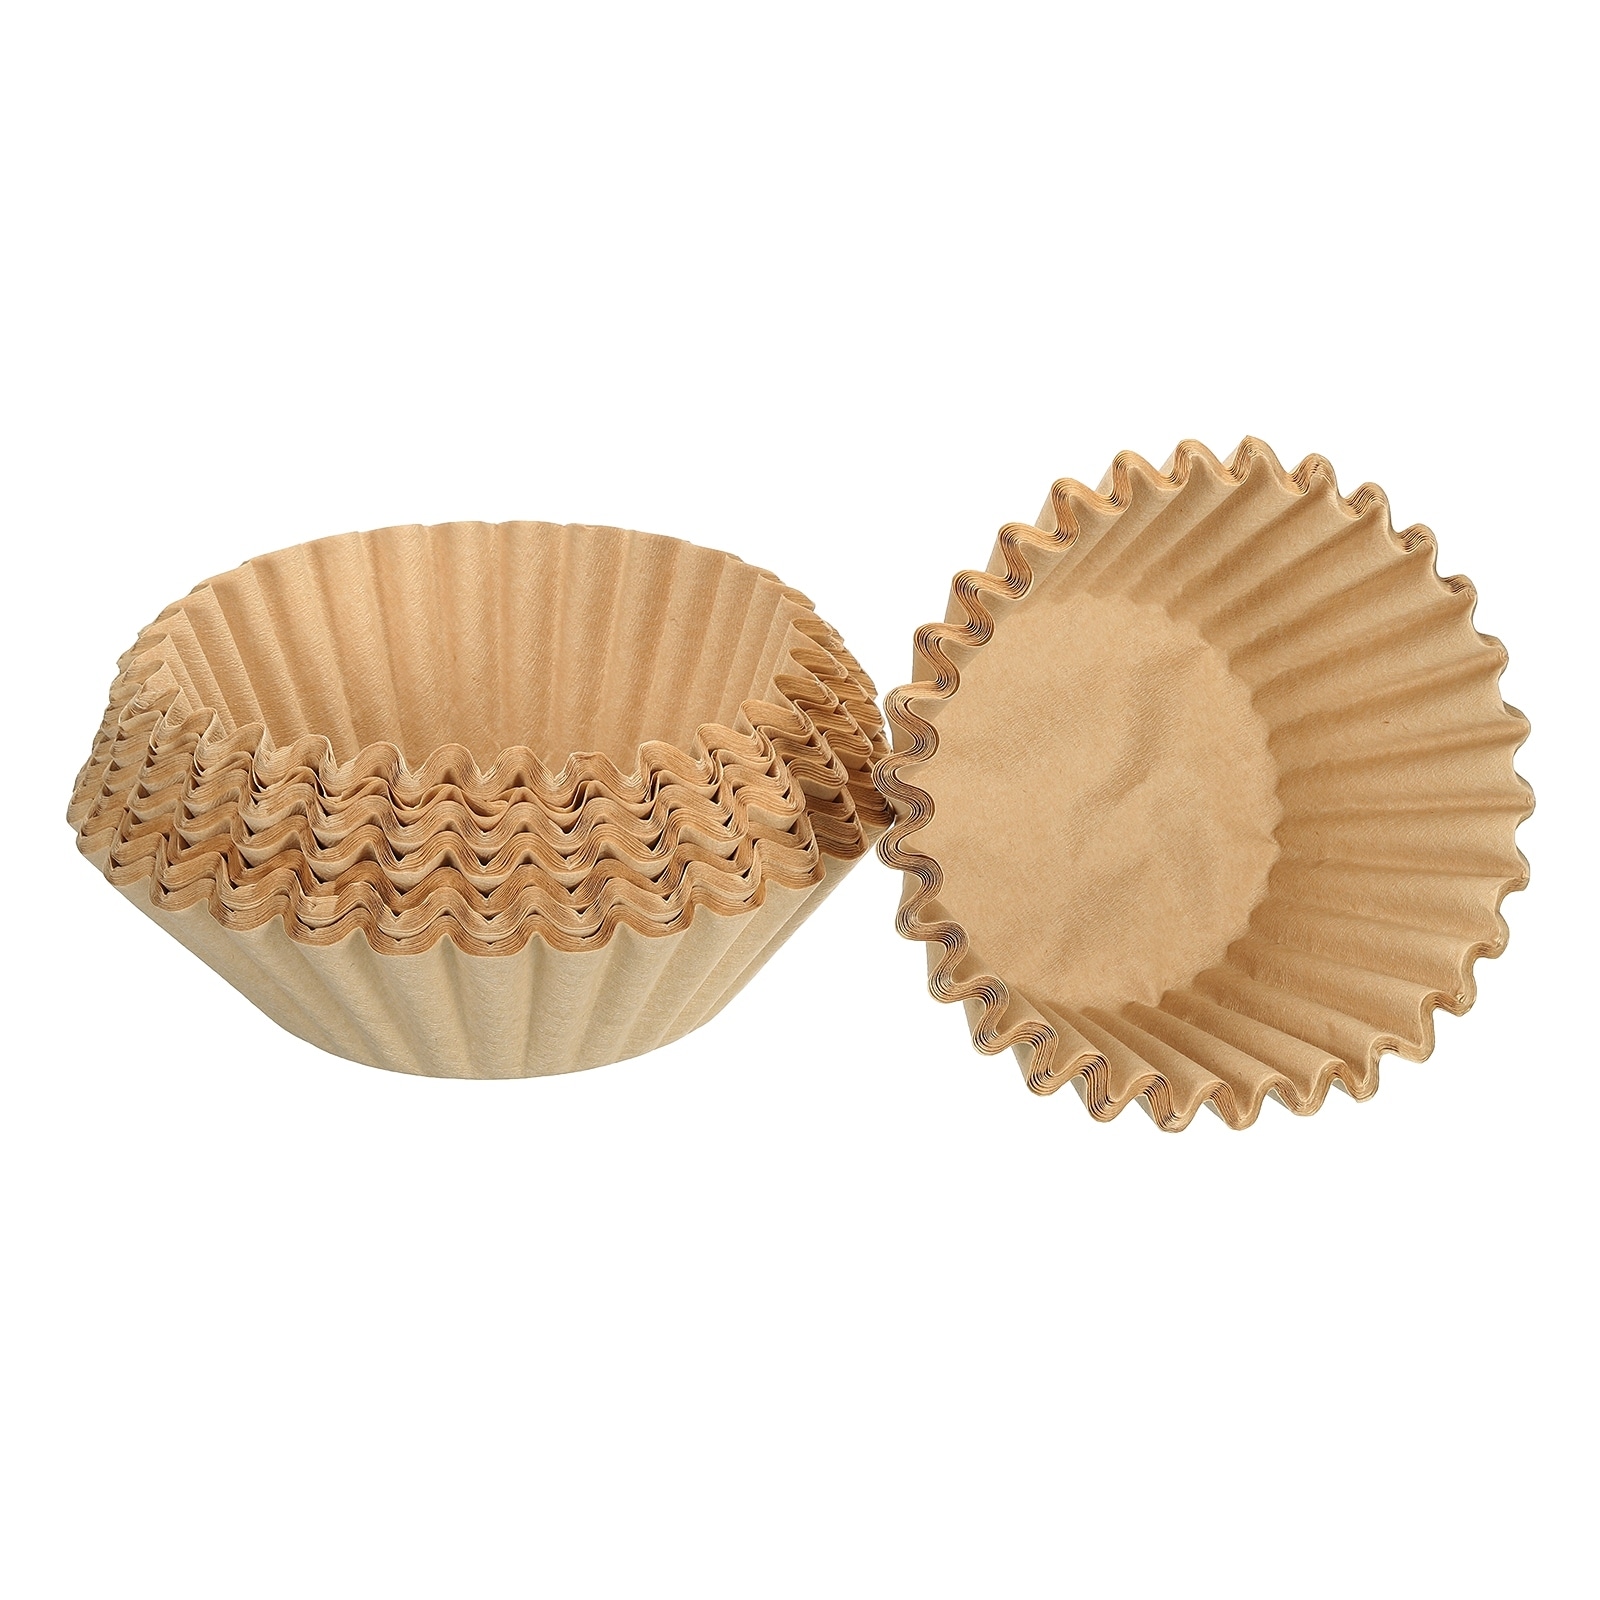 https://ak1.ostkcdn.com/images/products/is/images/direct/b76e4034c843b458ecd564a1d157425092a1a603/3-4-Cup-Basket-Coffee-Filters-Coffee-Paper-9.8x4.3-Inch-Drip-Coffee-Pack-of-100.jpg